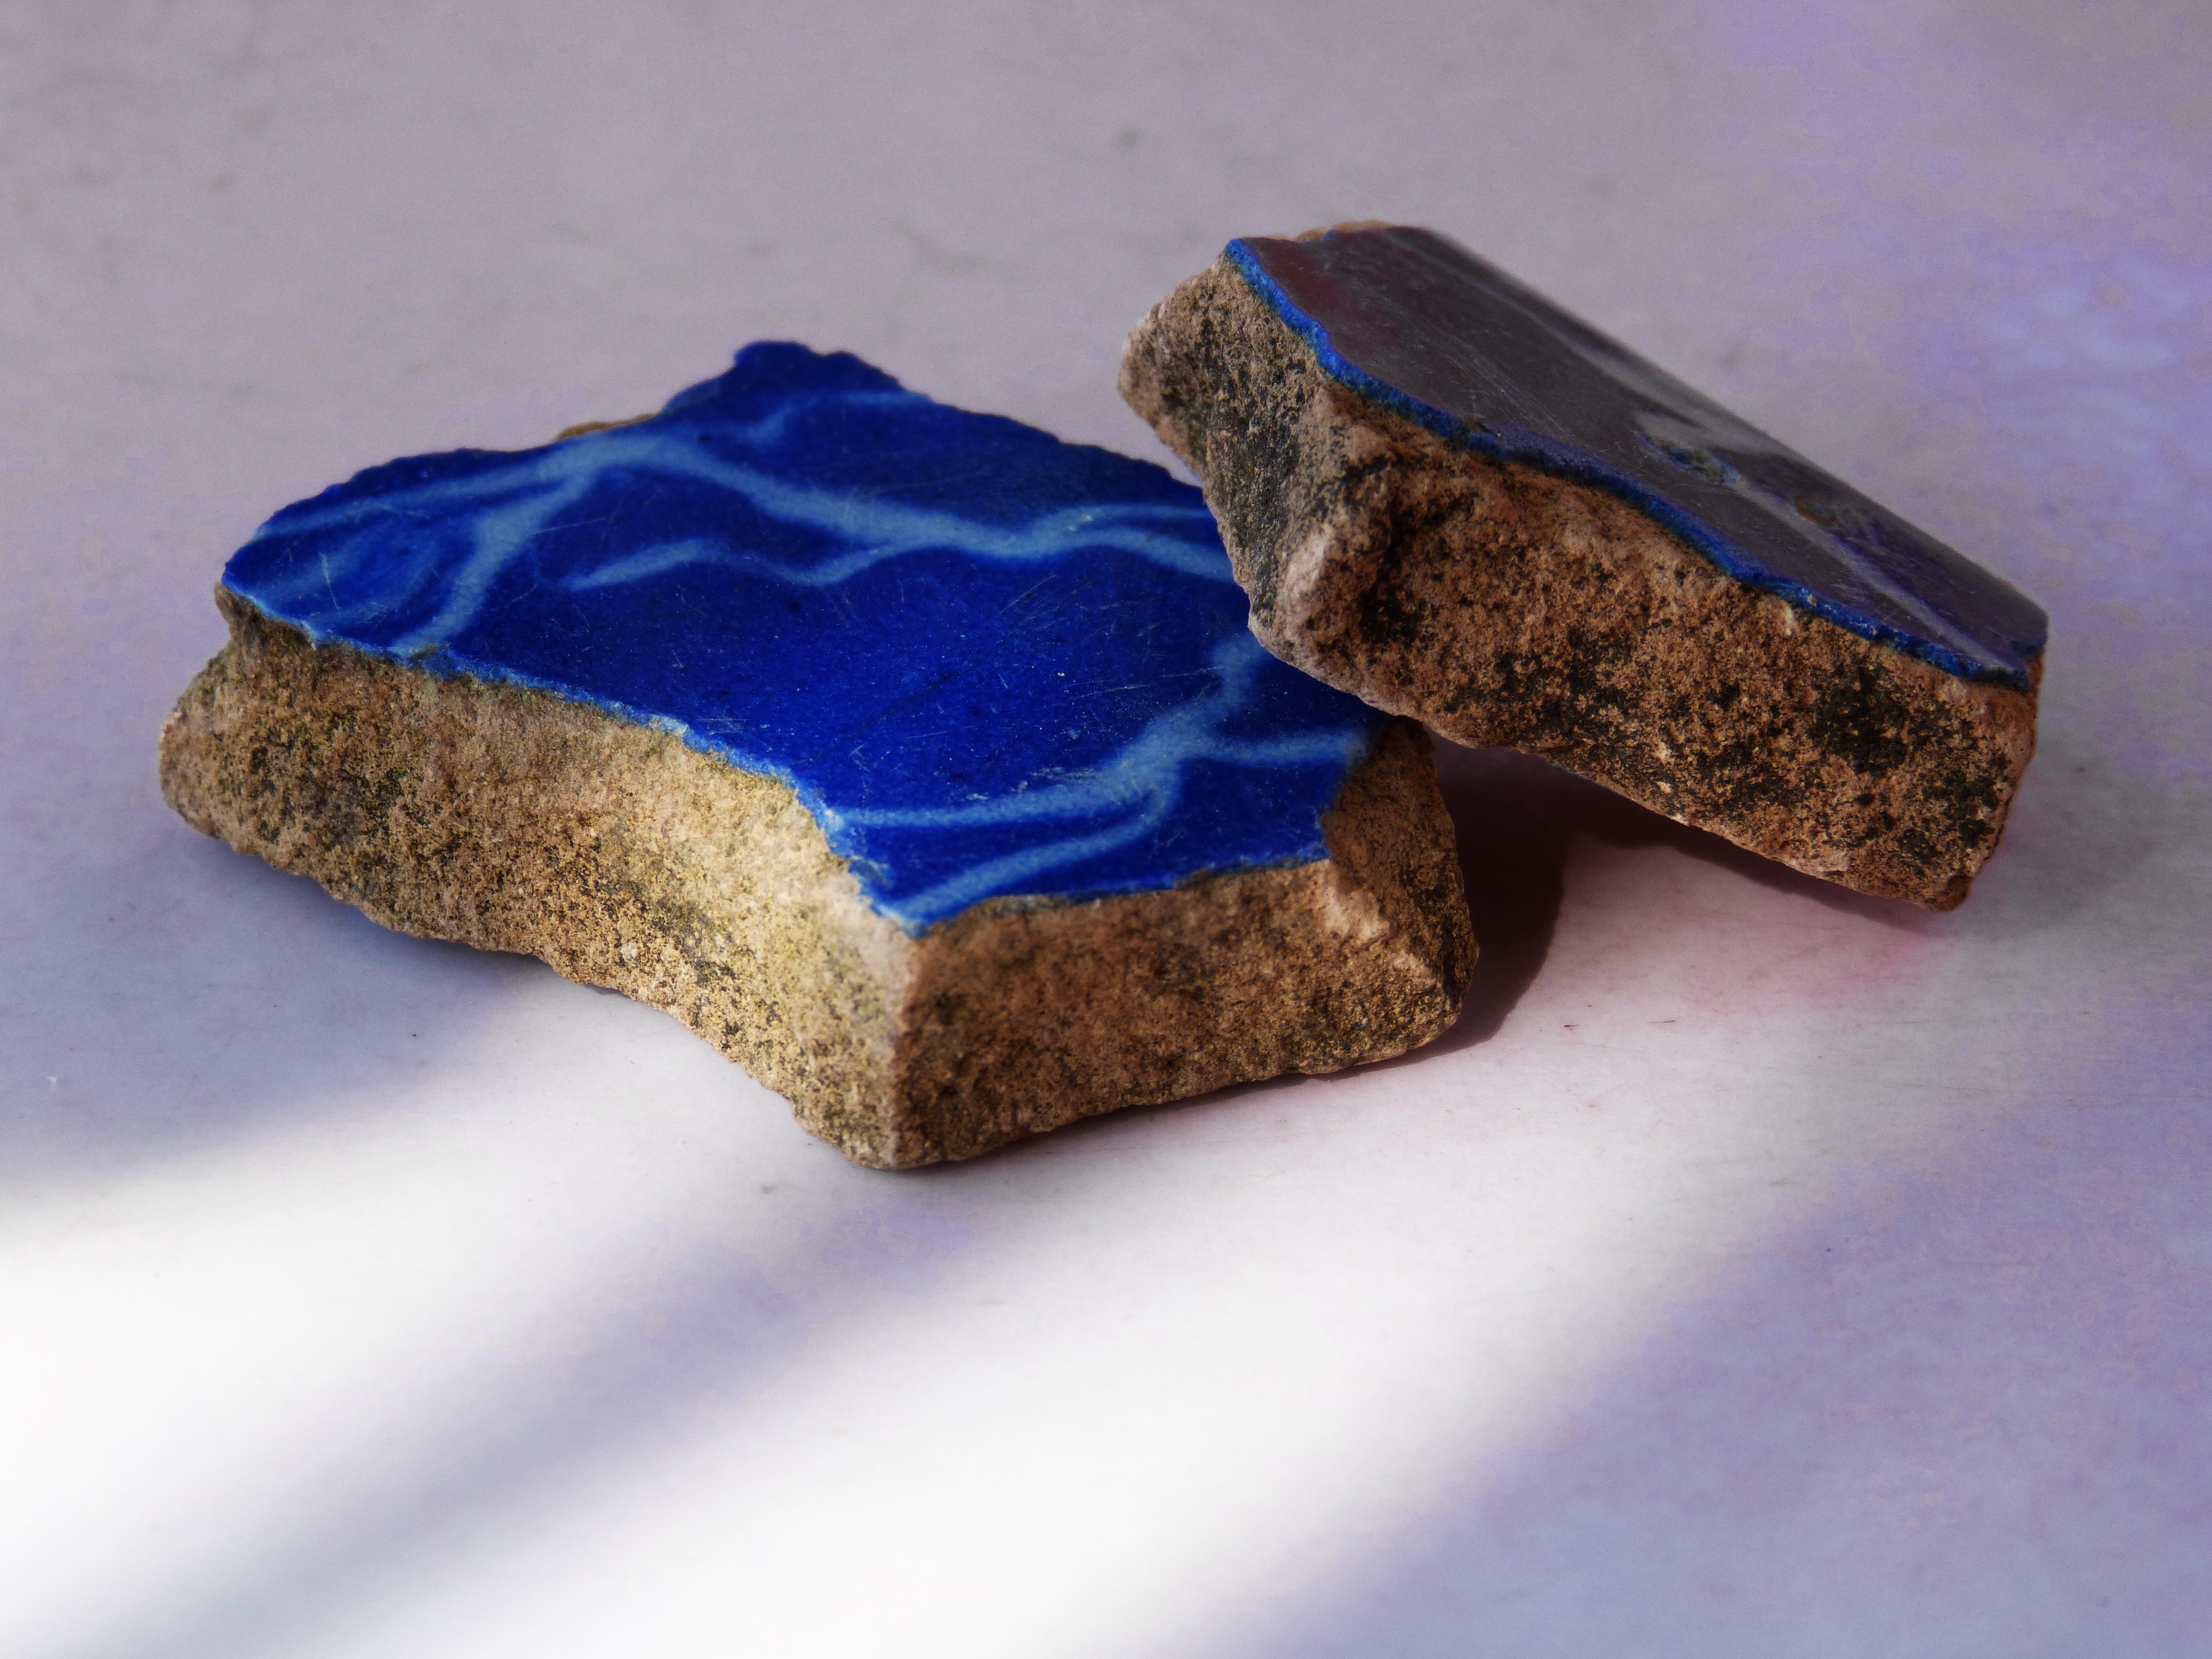 blue and brown rock fragment